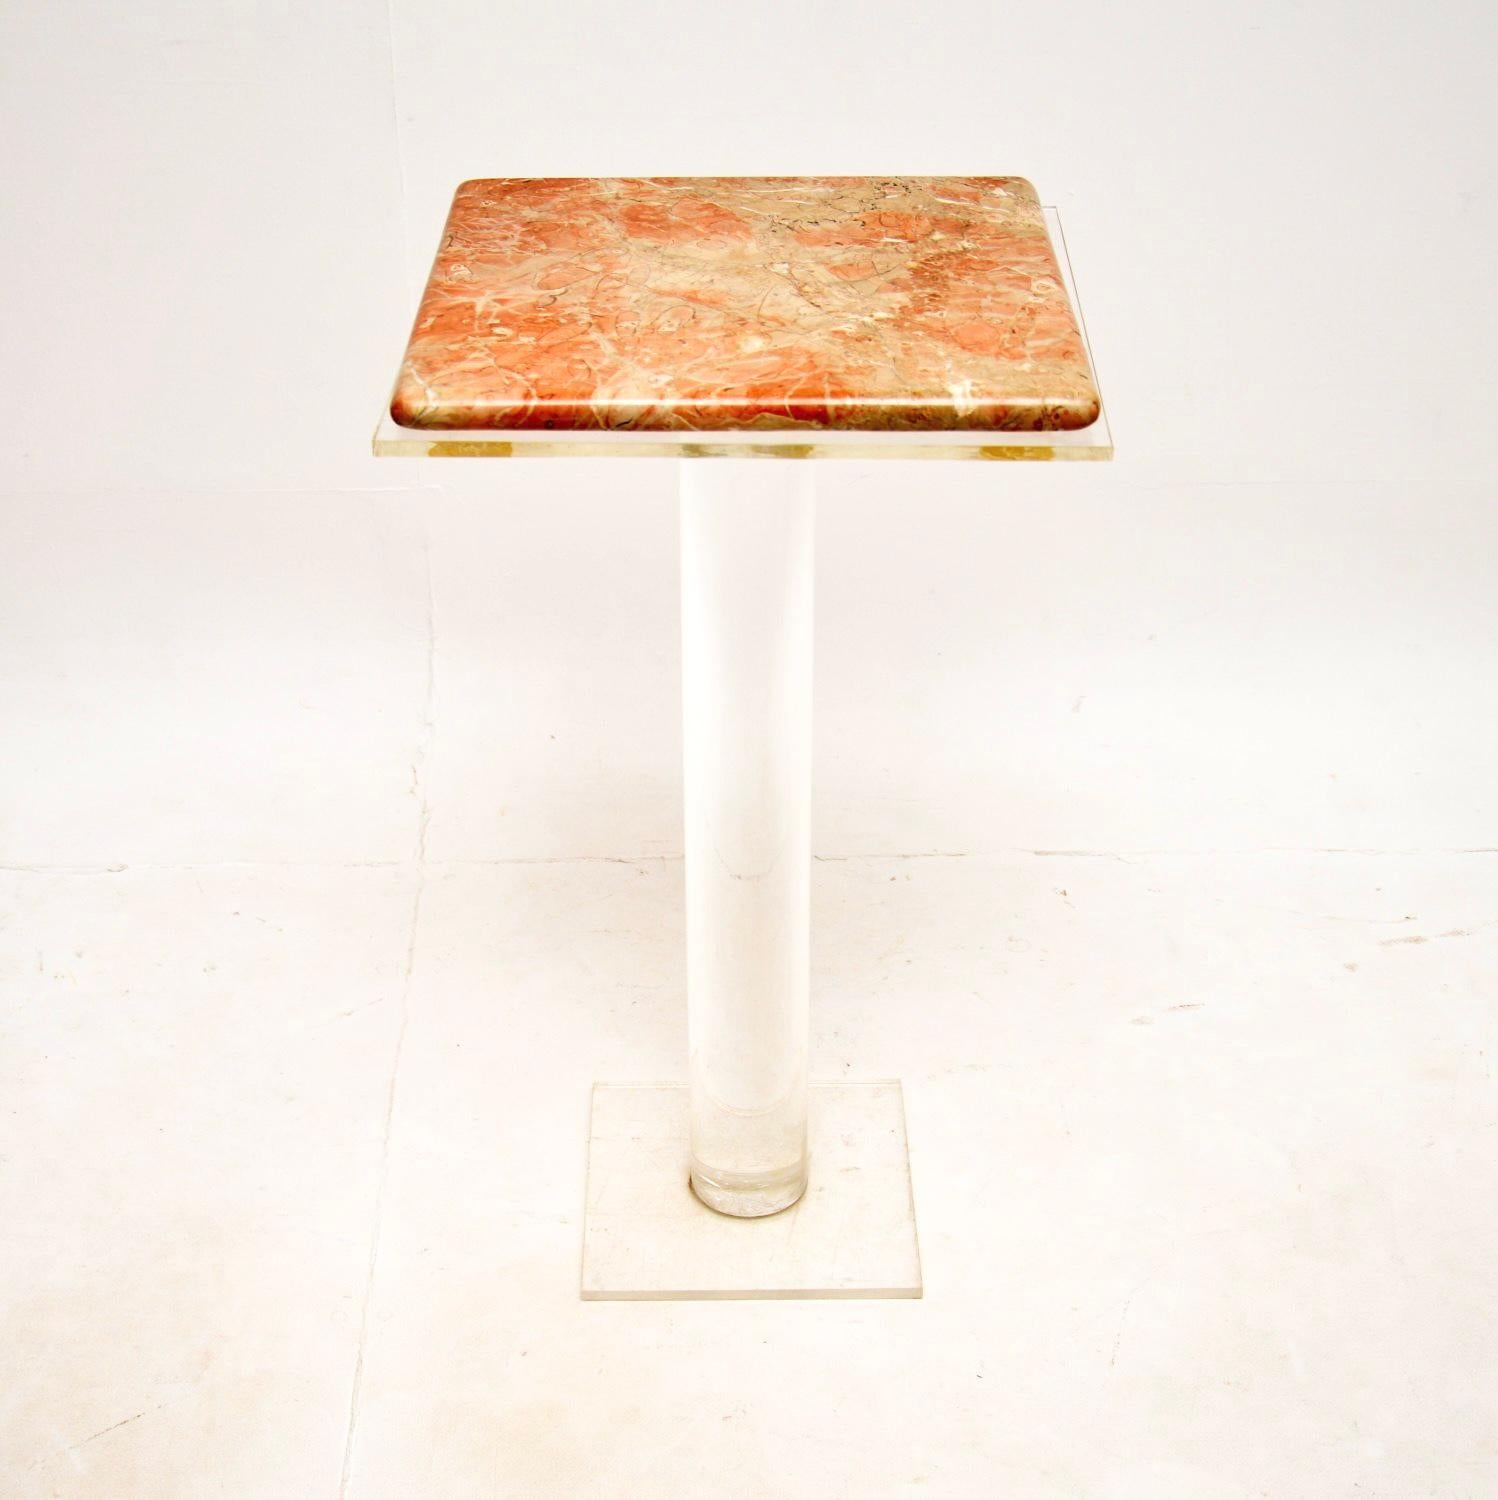 A very stylish and quirky vintage marble and lucite pedestal side table. This was likely made in Italy, it dates from around the 1980’s.

It has a gorgeous marble top with pink tones, that sits on a clear acrylic cylindrical base. This is perfect